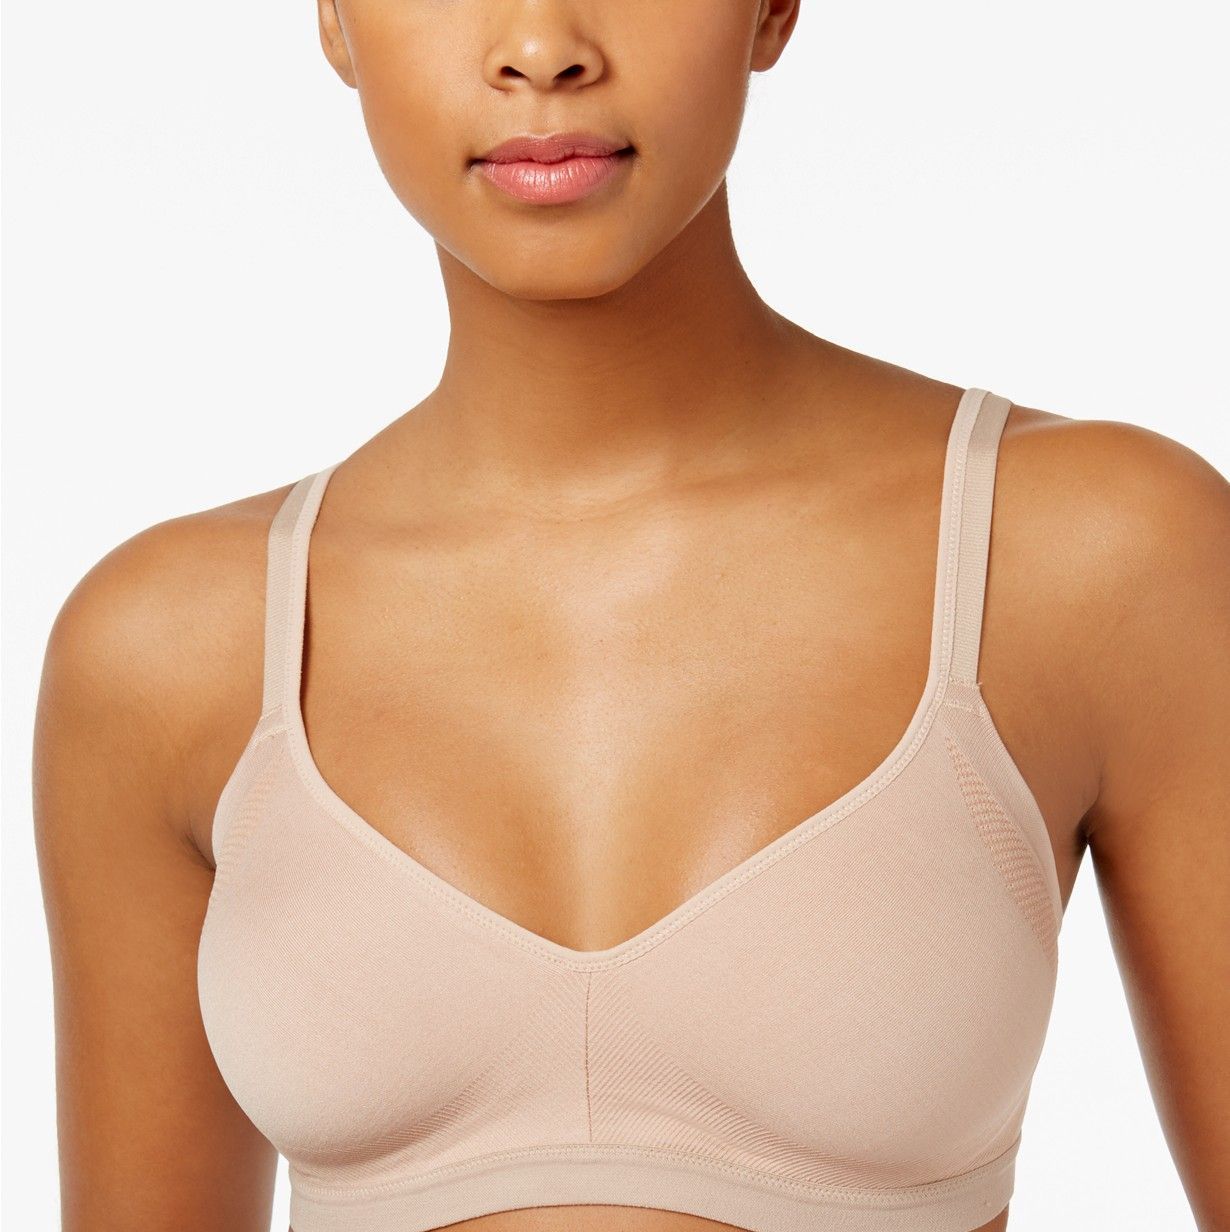 The 15 Best Bras for Big Boobs - Top-Rated Bras for Large Breasts